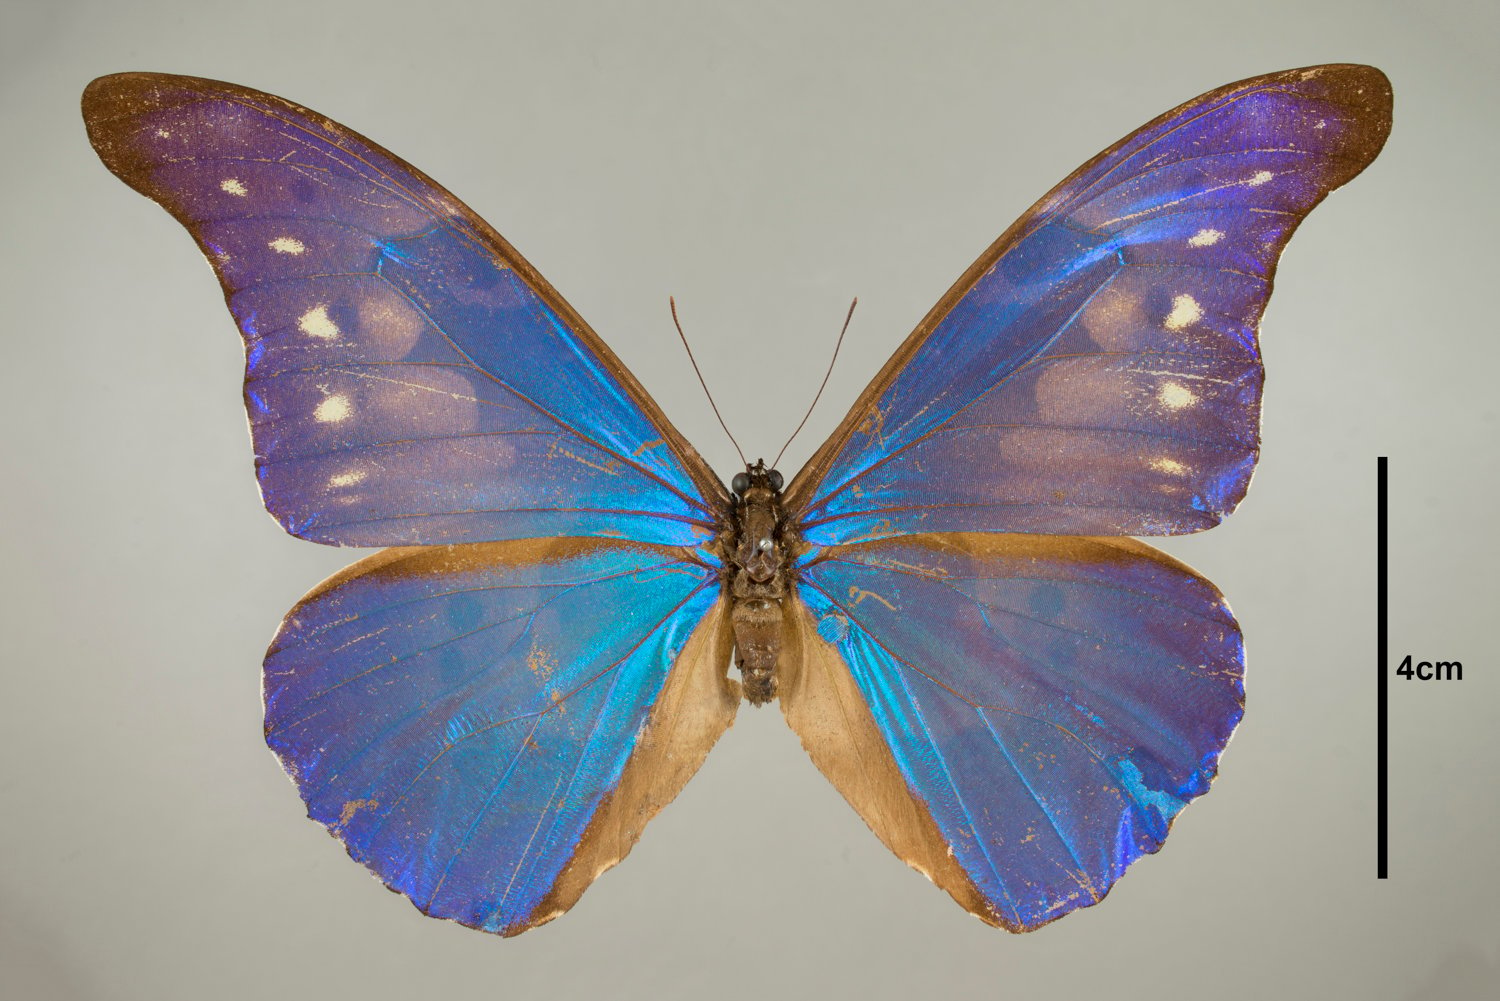 Butterfly from the Field's Insects collection (Courtesy of the Field Museum)